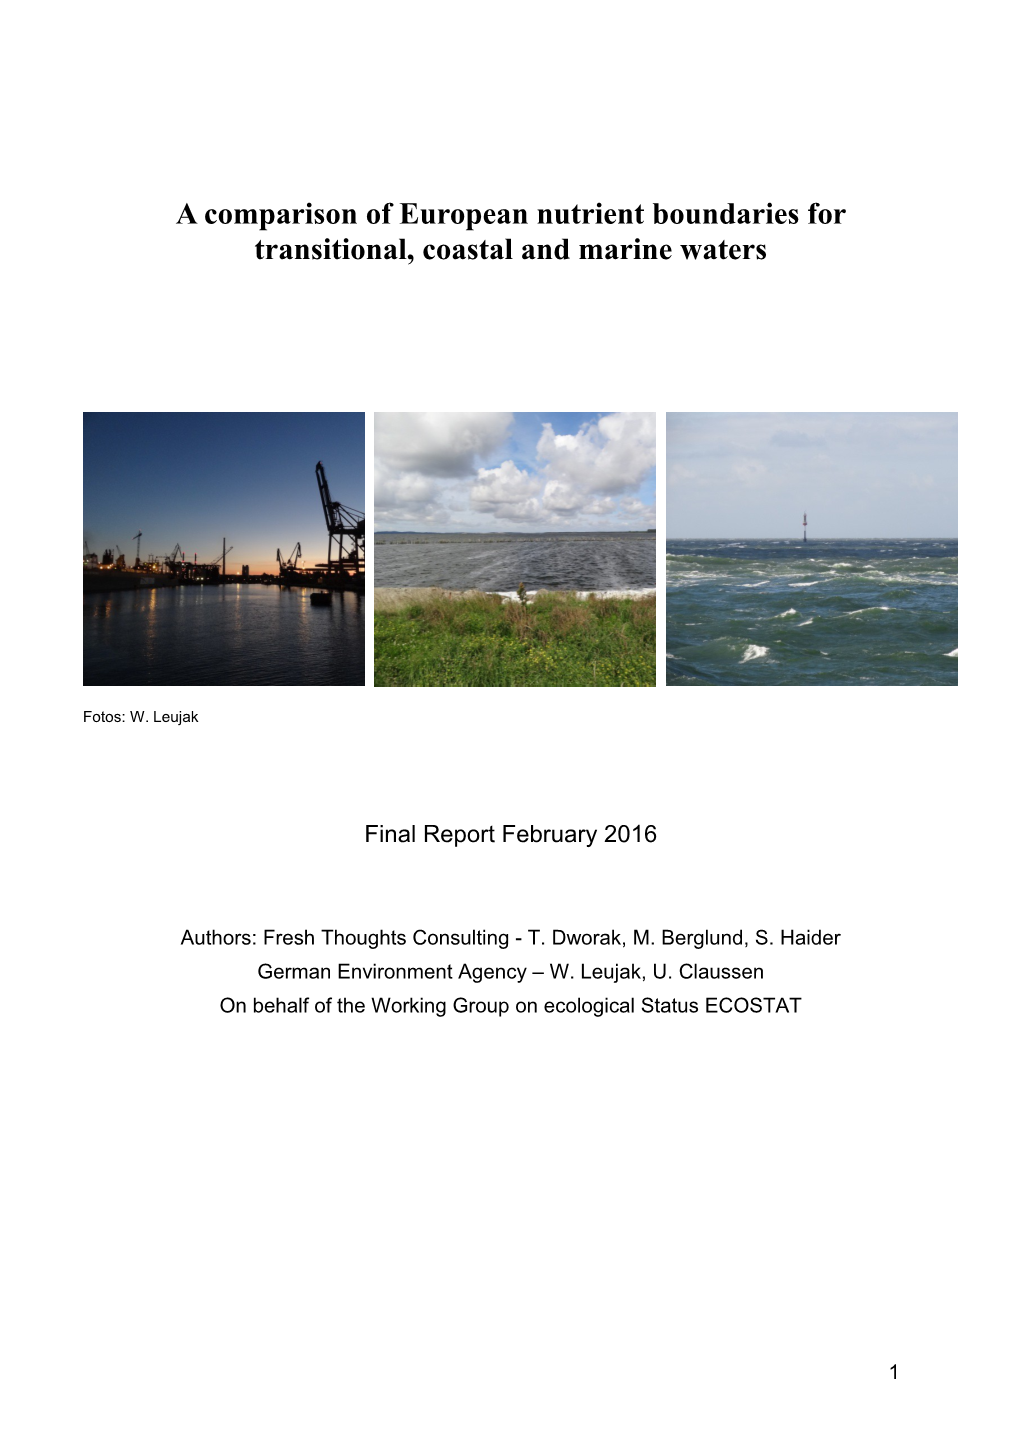 A Comparison of European Nutrient Standards for Transitional, Coastal and Marine Waters